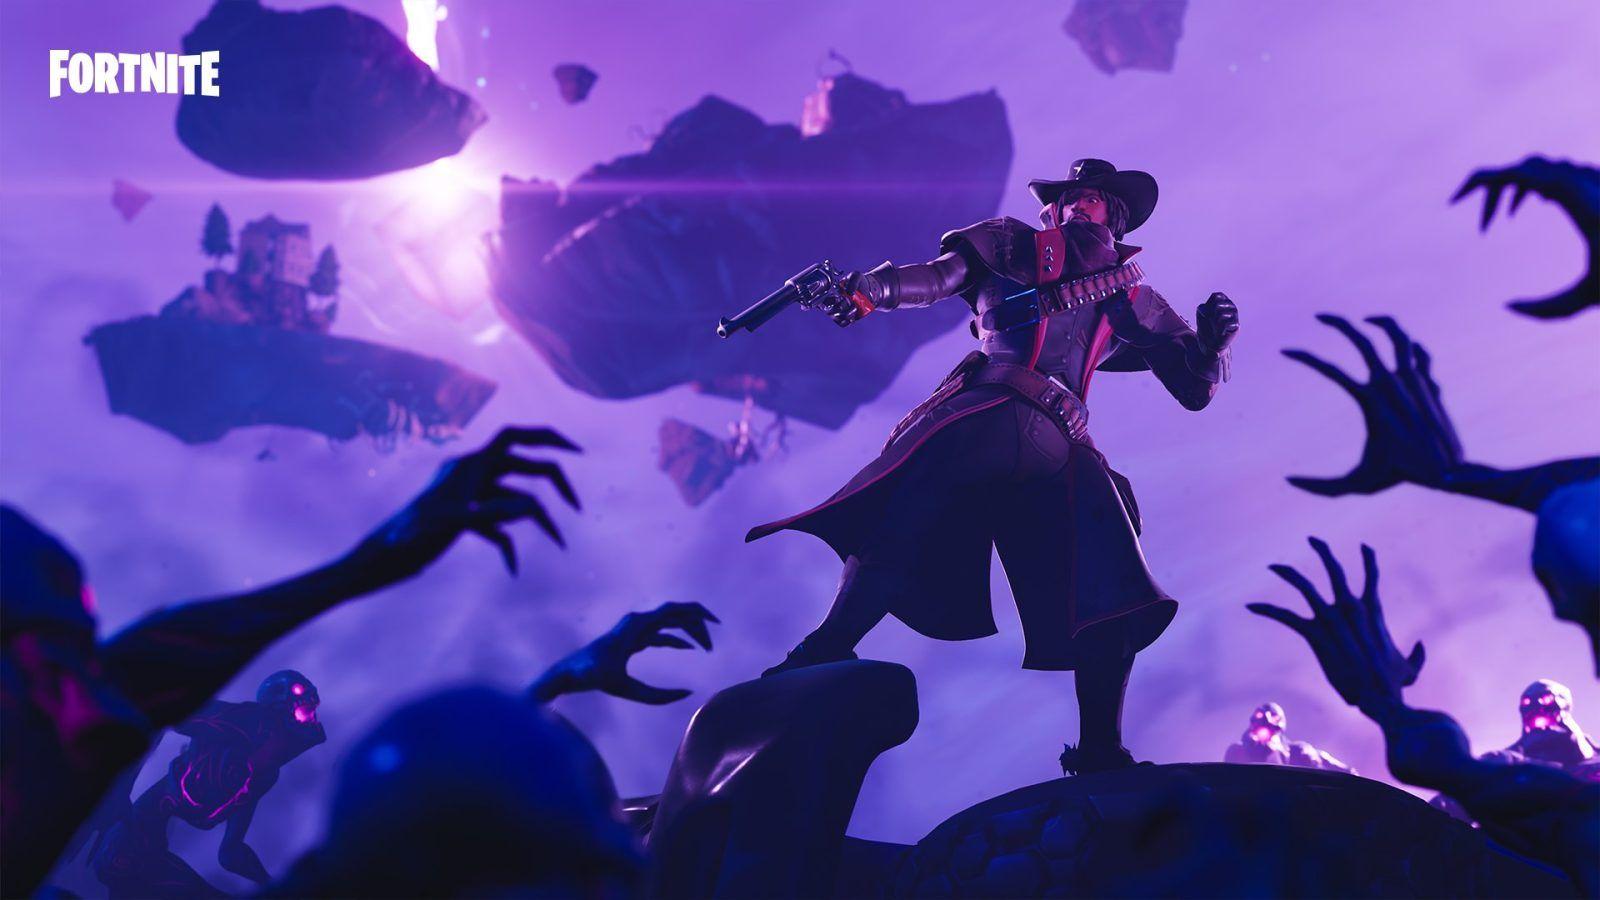 Fortnite for iOS updated with 'Fortnitemares' Halloween content